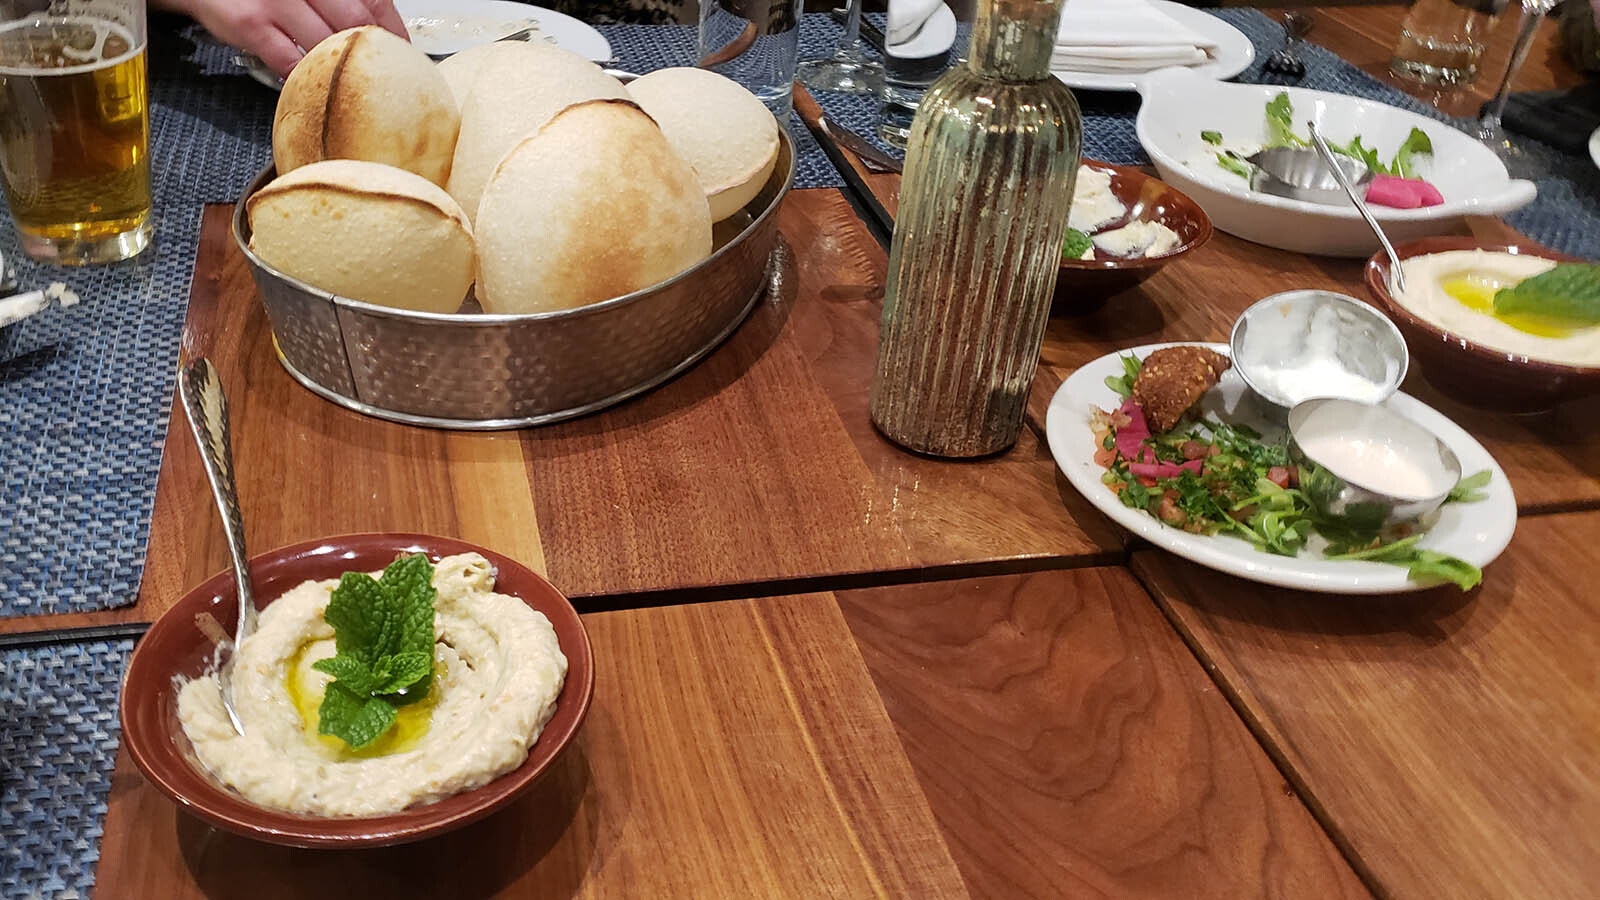 Hummus comes drizzled with olive oil and garnished with mint In the background, a tin basket full of toasted balloon bread or puff pitas.